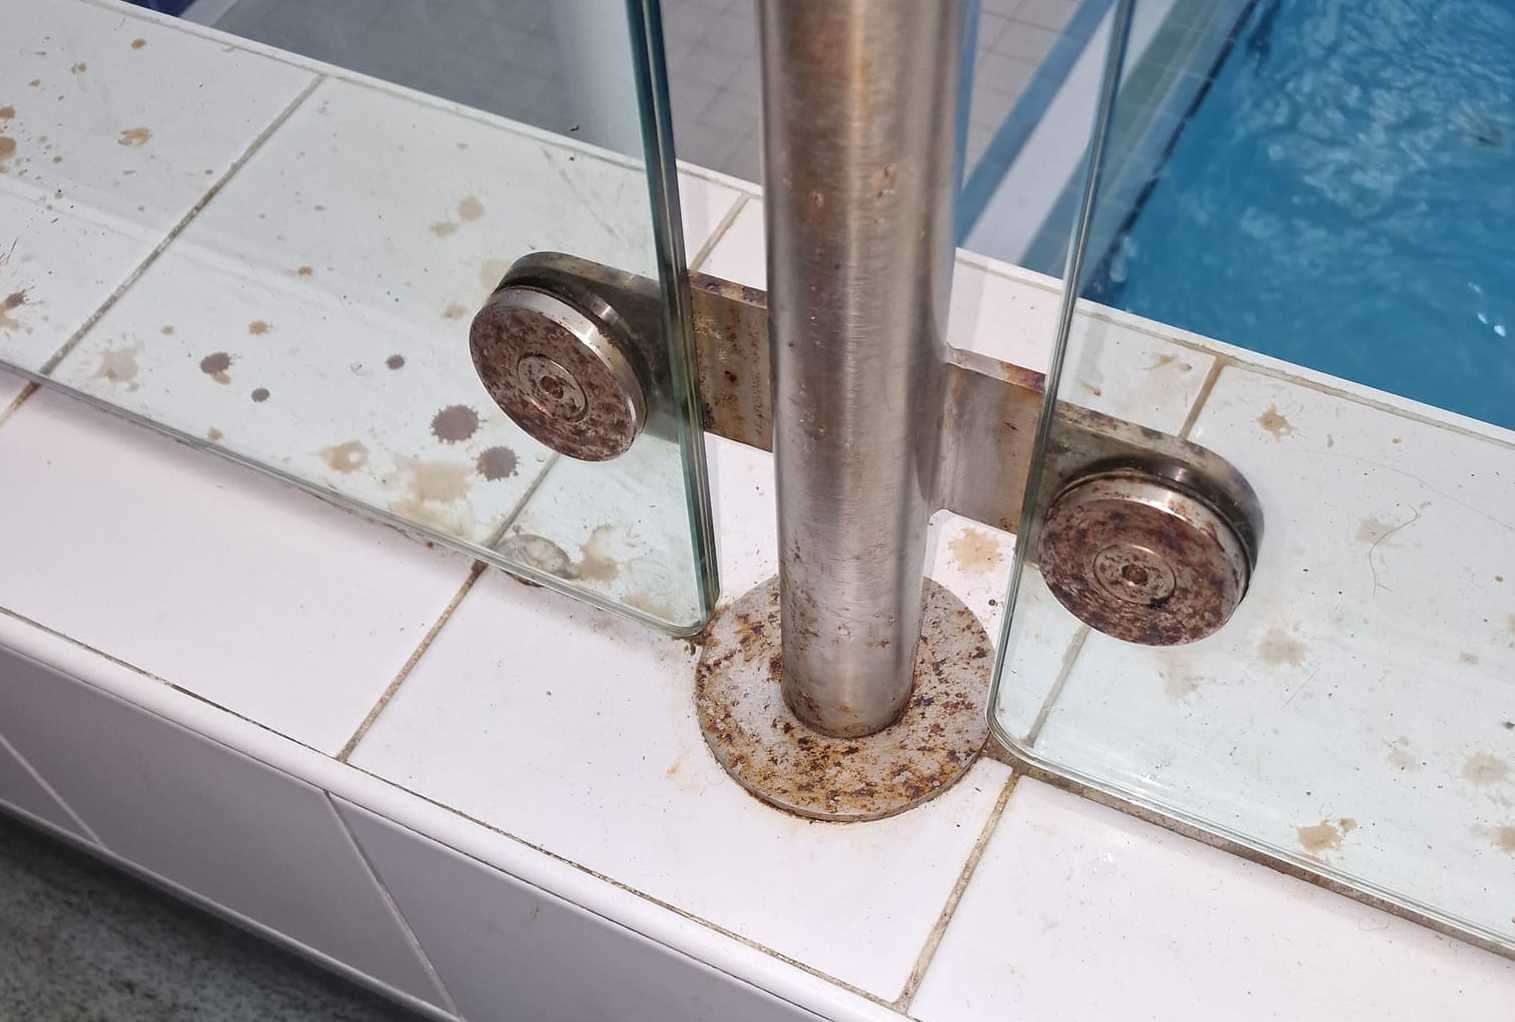 Freedom Leisure says it is working to address rust markings on handrails around the pools